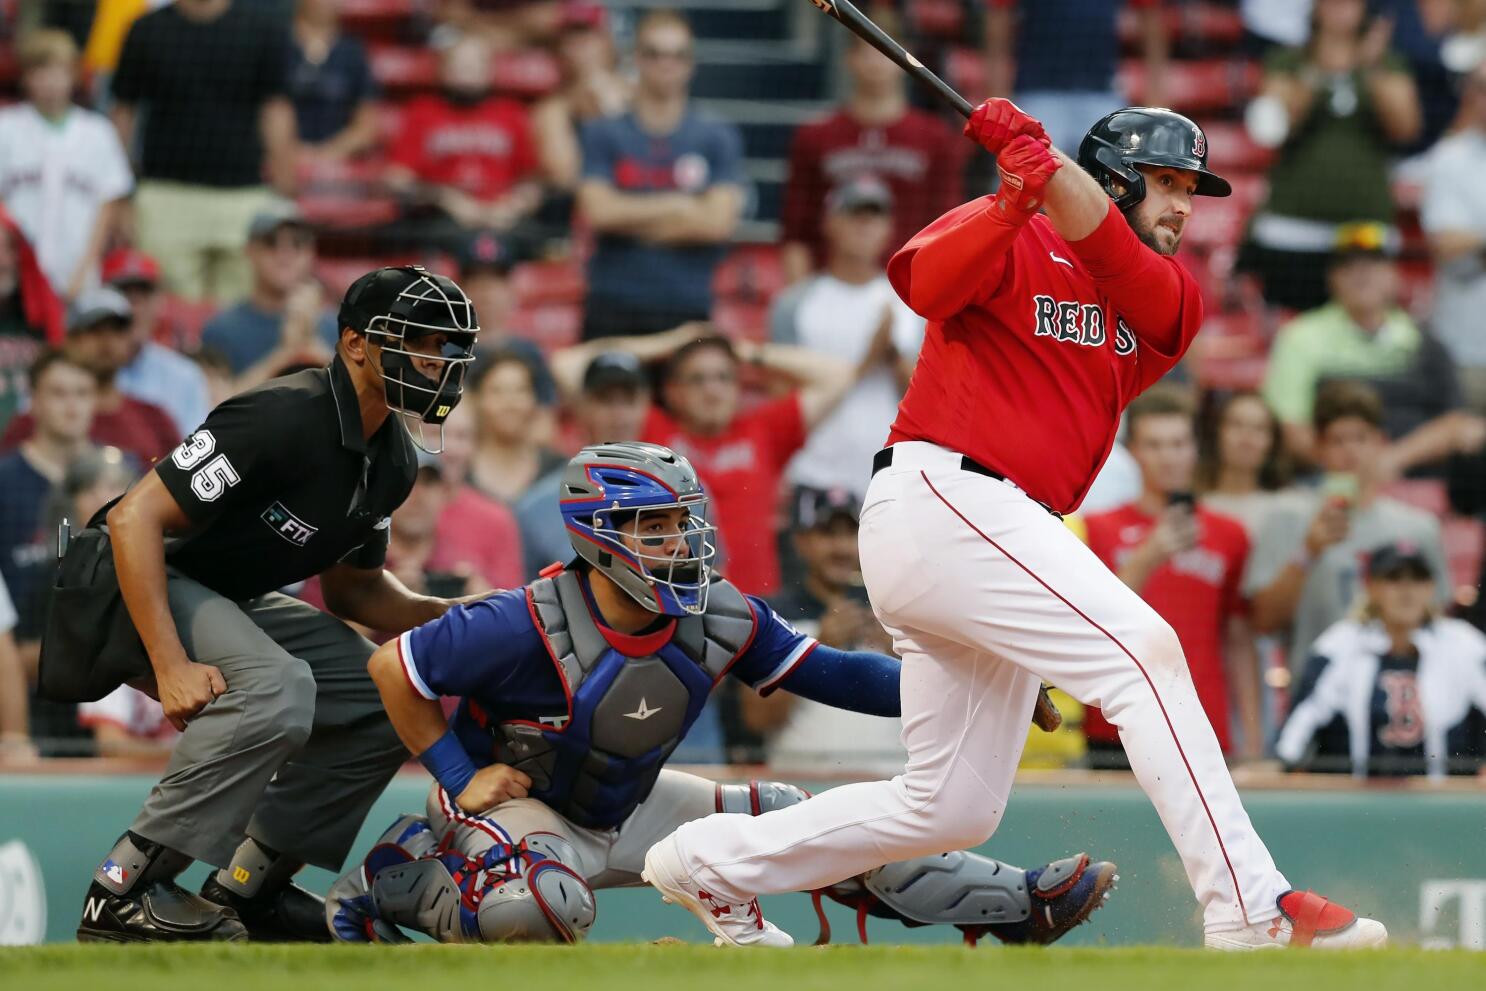 Red Sox win a wild one over Rangers on Travis Shaw's grand slam in